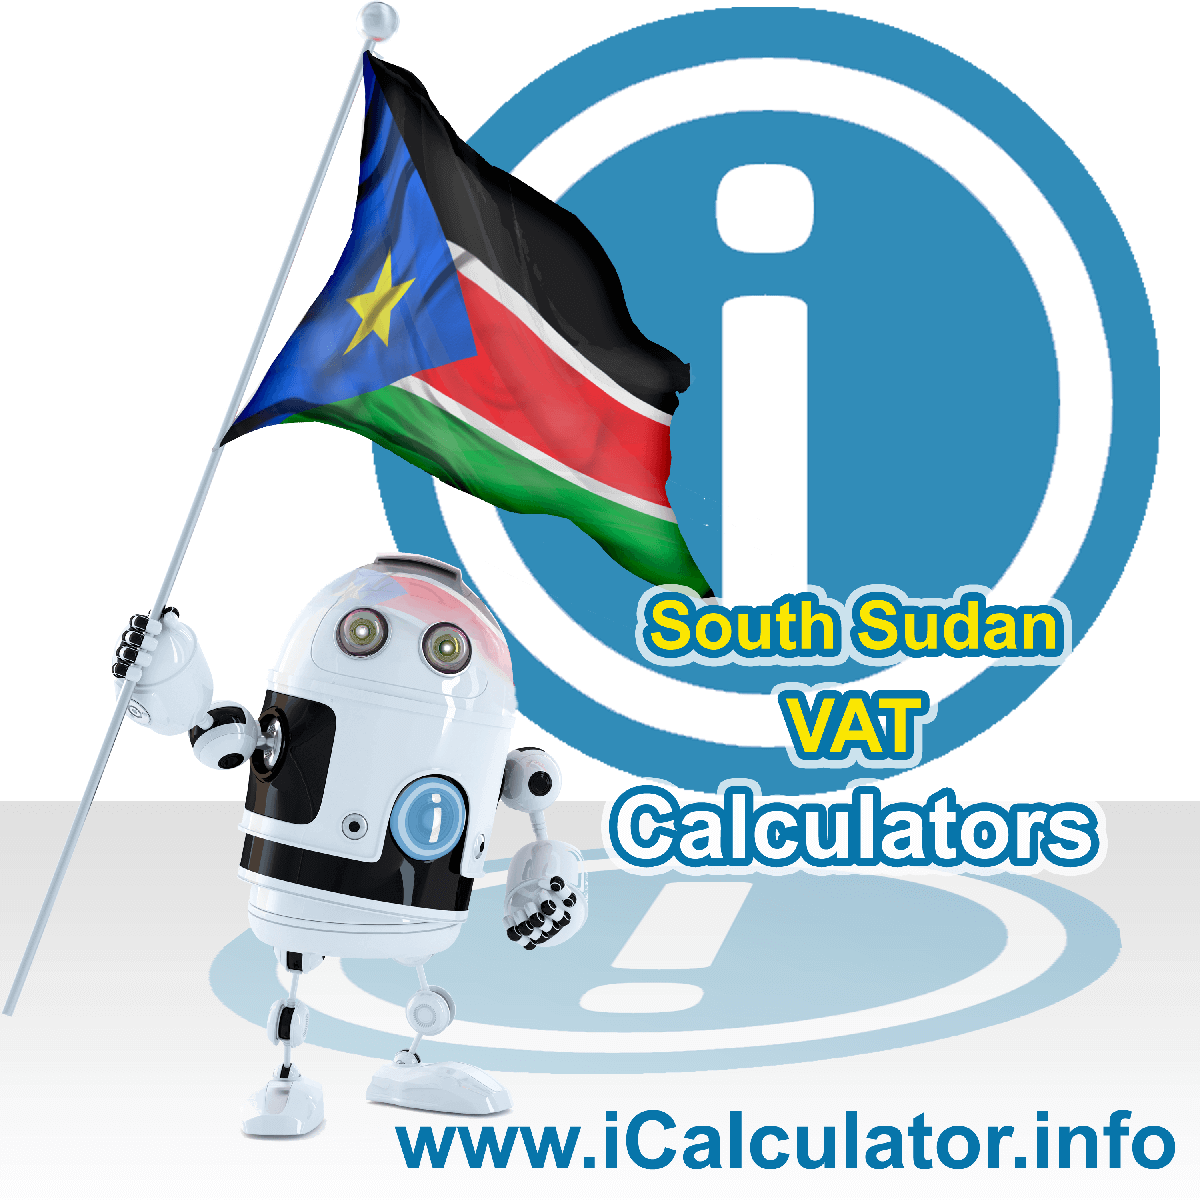 South Sudan VAT Calculator. This image shows the South Sudan flag and information relating to the VAT formula used for calculating Value Added Tax in South Sudan using the South Sudan VAT Calculator in 2024